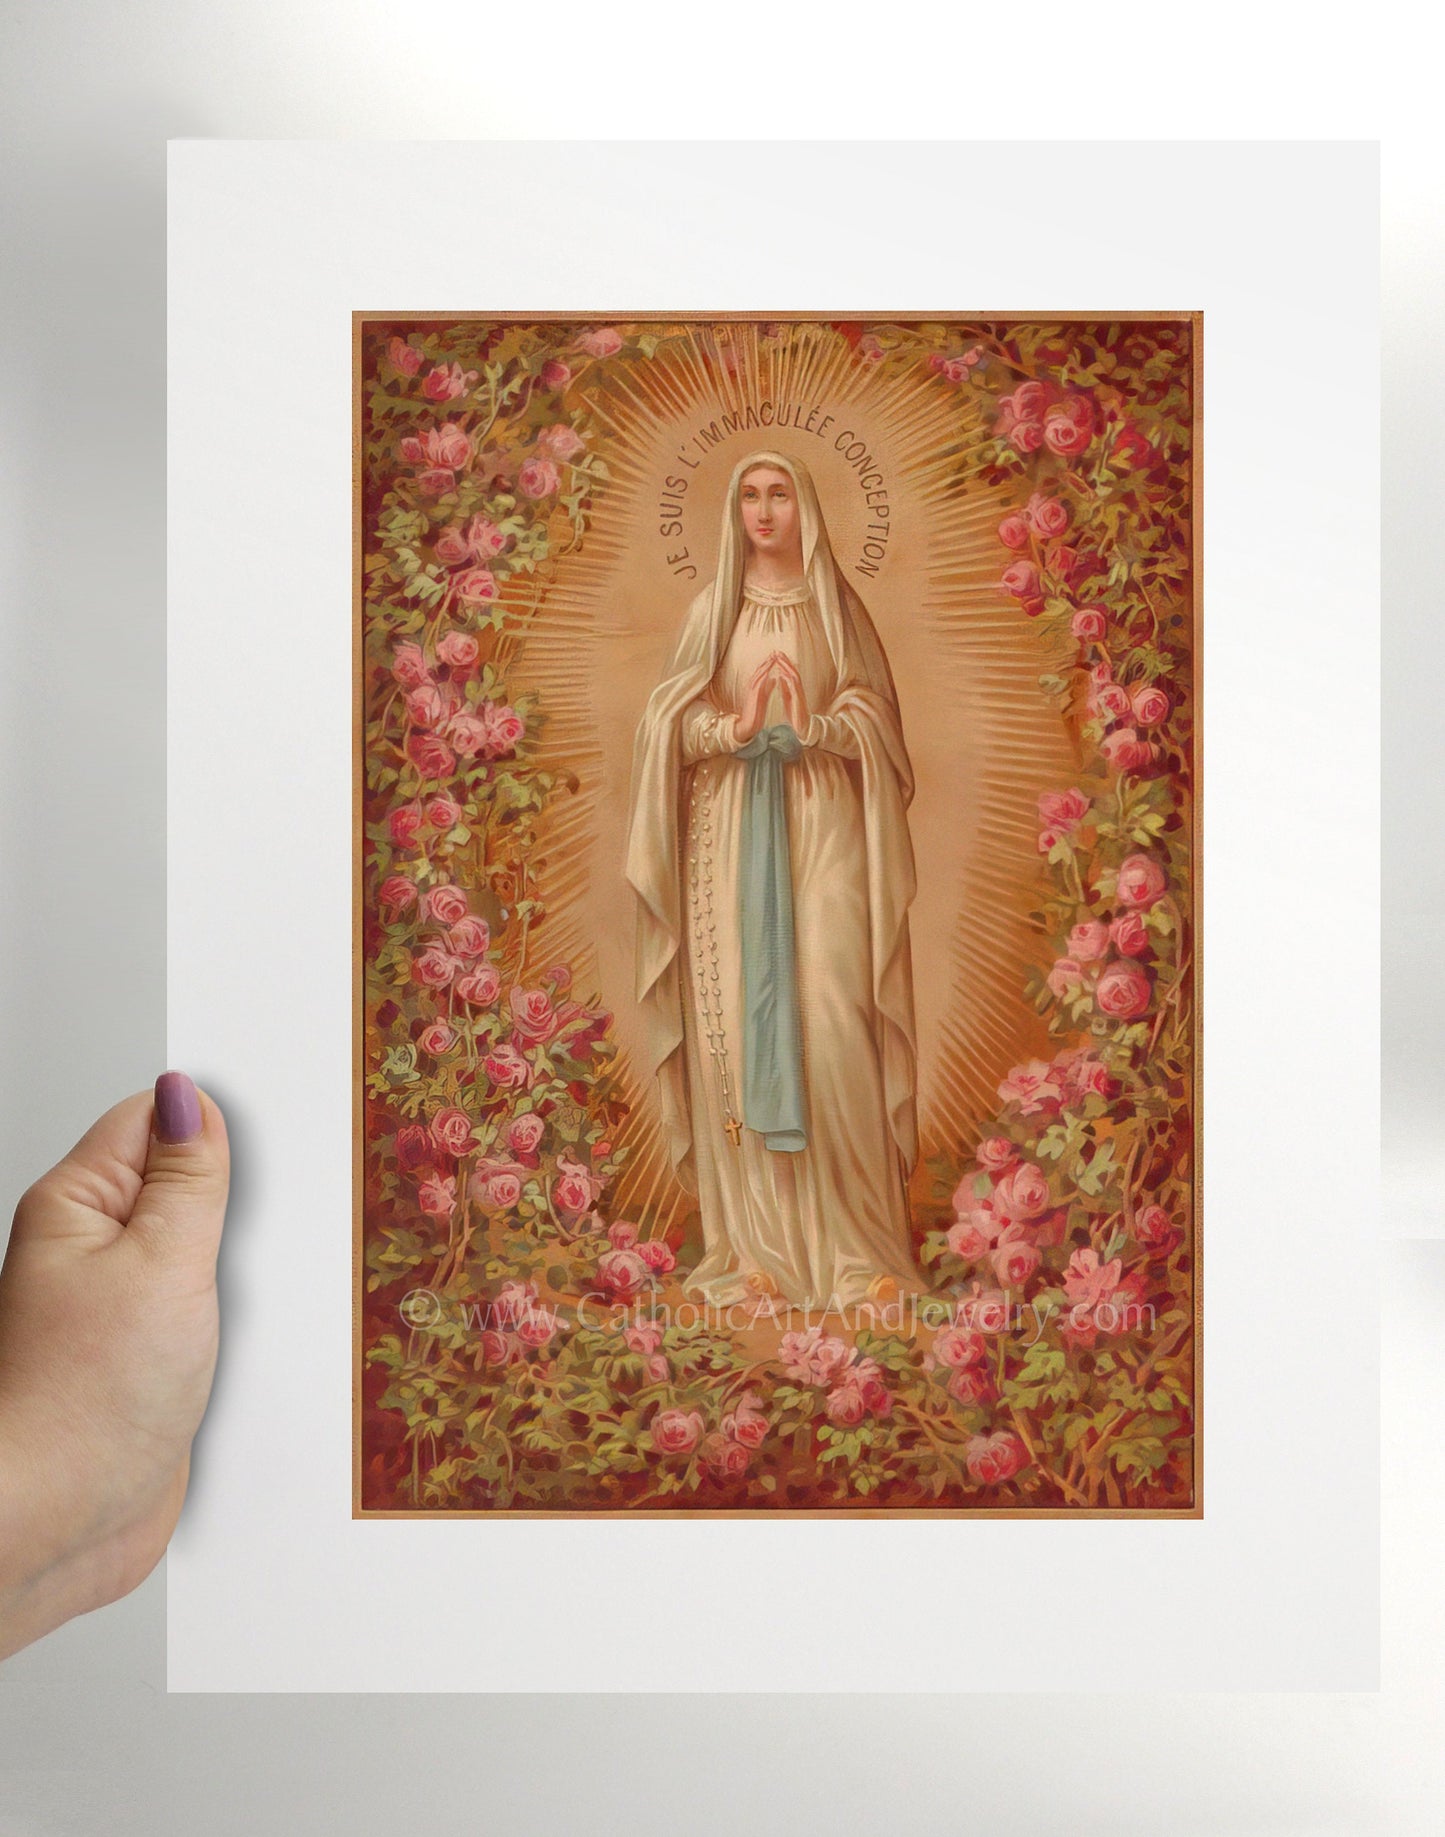 Our Lady of Lourdes Roses – based on a Vintage French Holy Card – Catholic Art Print